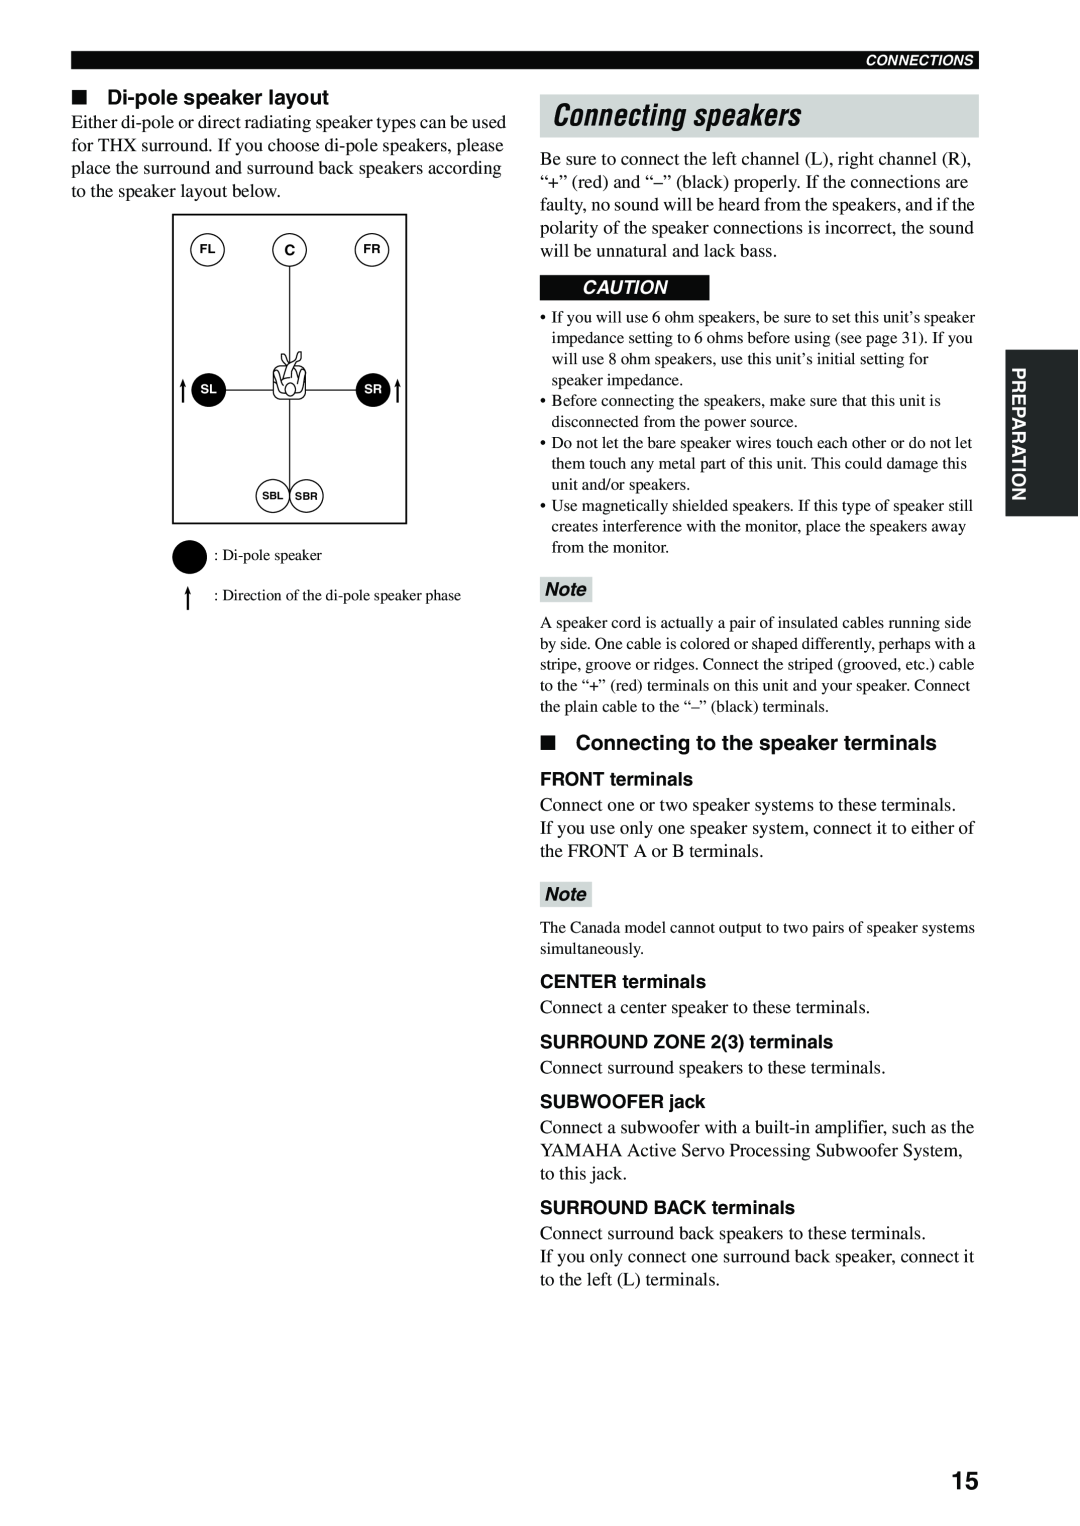 Yamaha X-V2600 owner manual Connecting speakers, Di-polespeaker layout, Connecting to the speaker terminals 